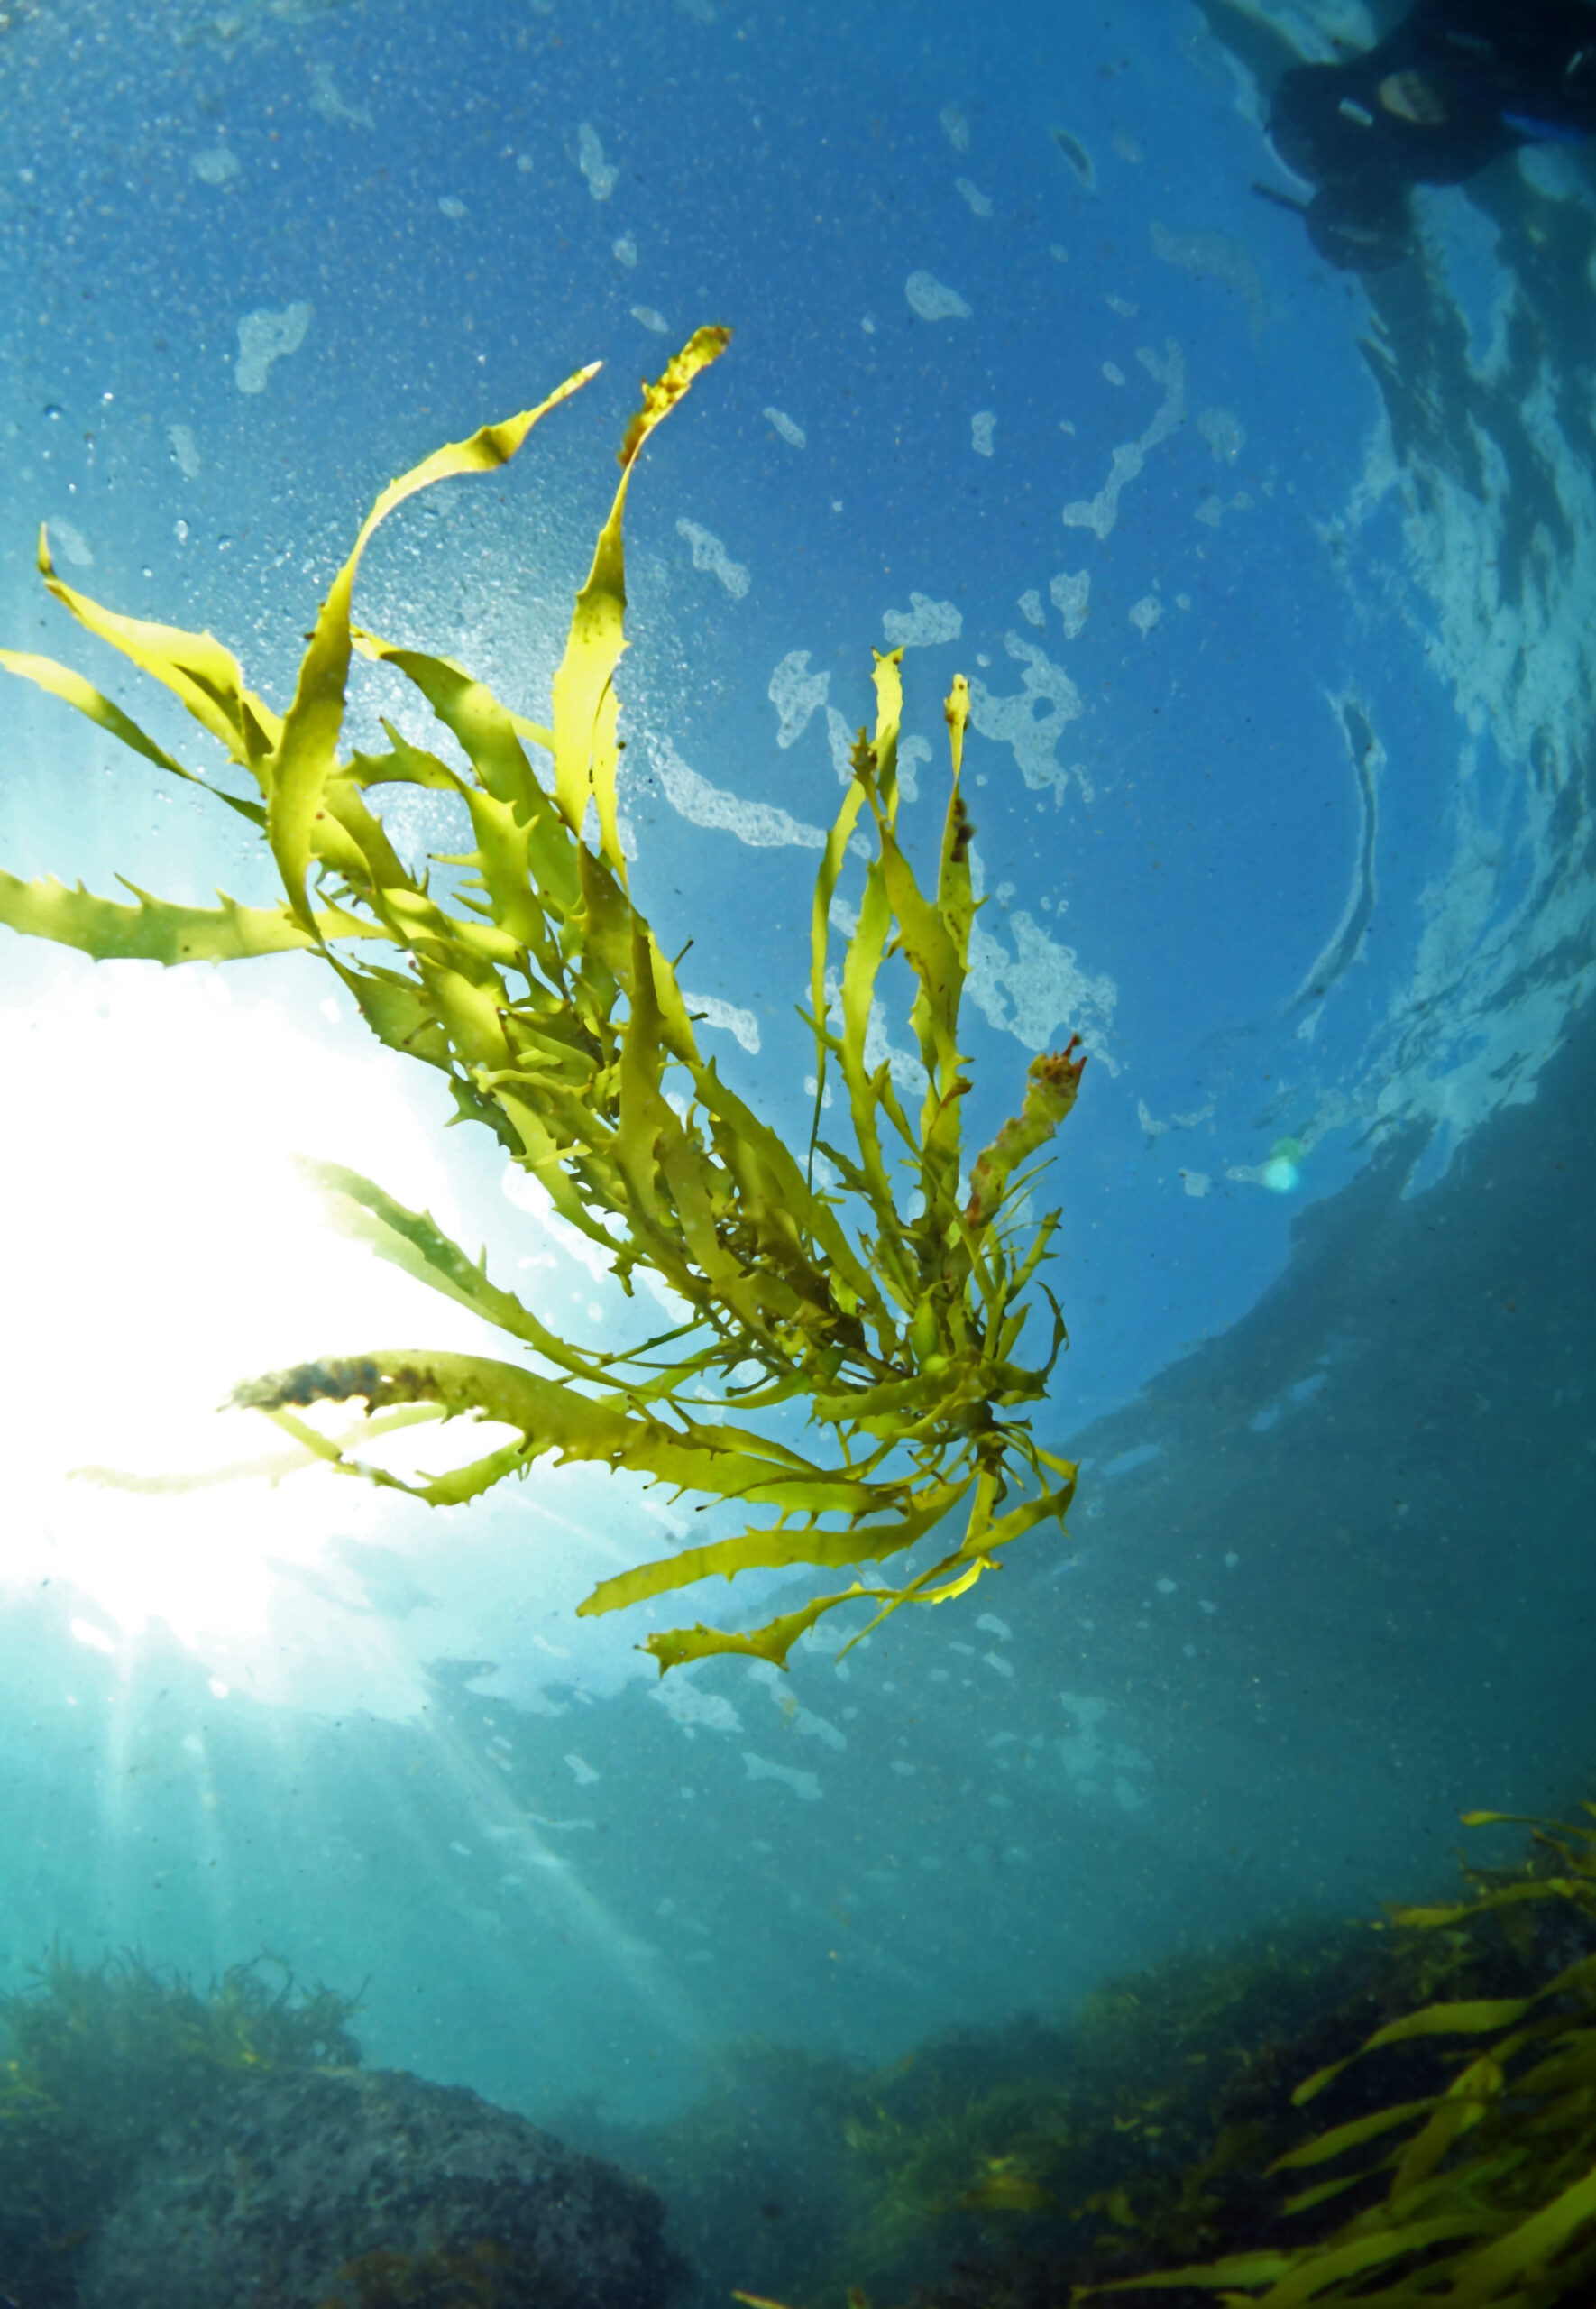 WBBSE Notes For Class 8 General Science And Environment Chapter 10 Biodiversity Sea Weed .